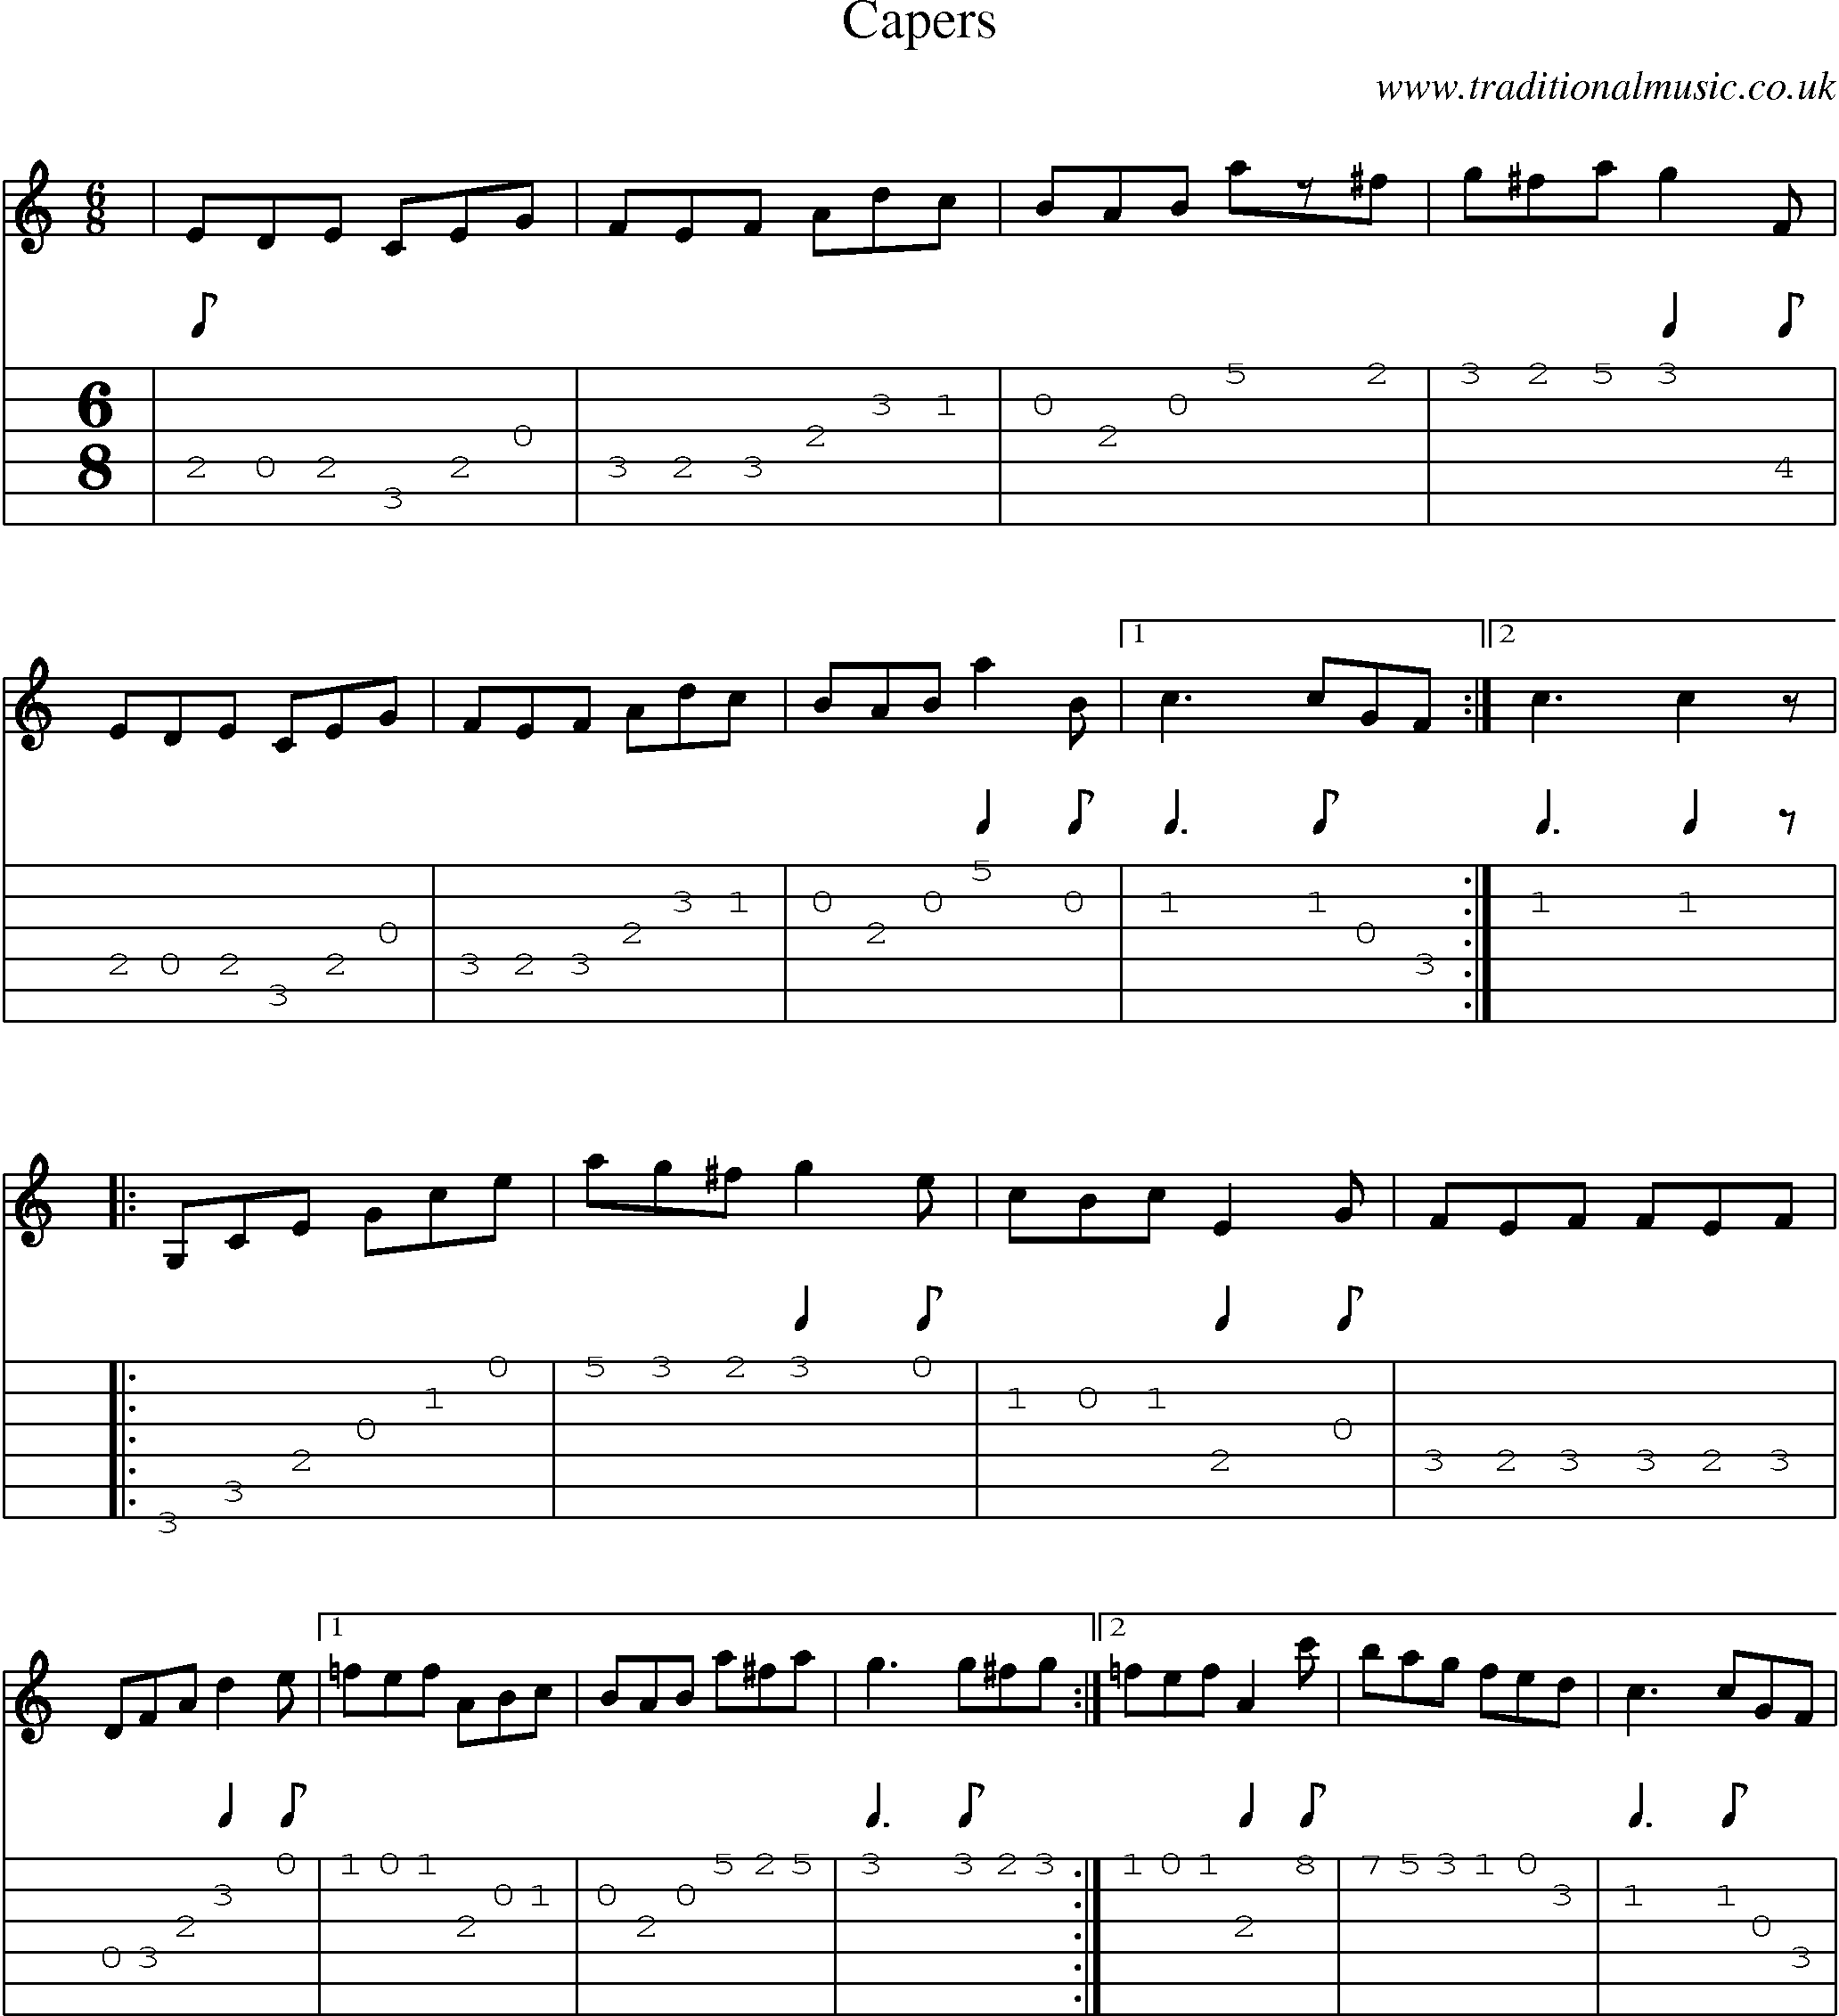 Music Score and Guitar Tabs for Capers